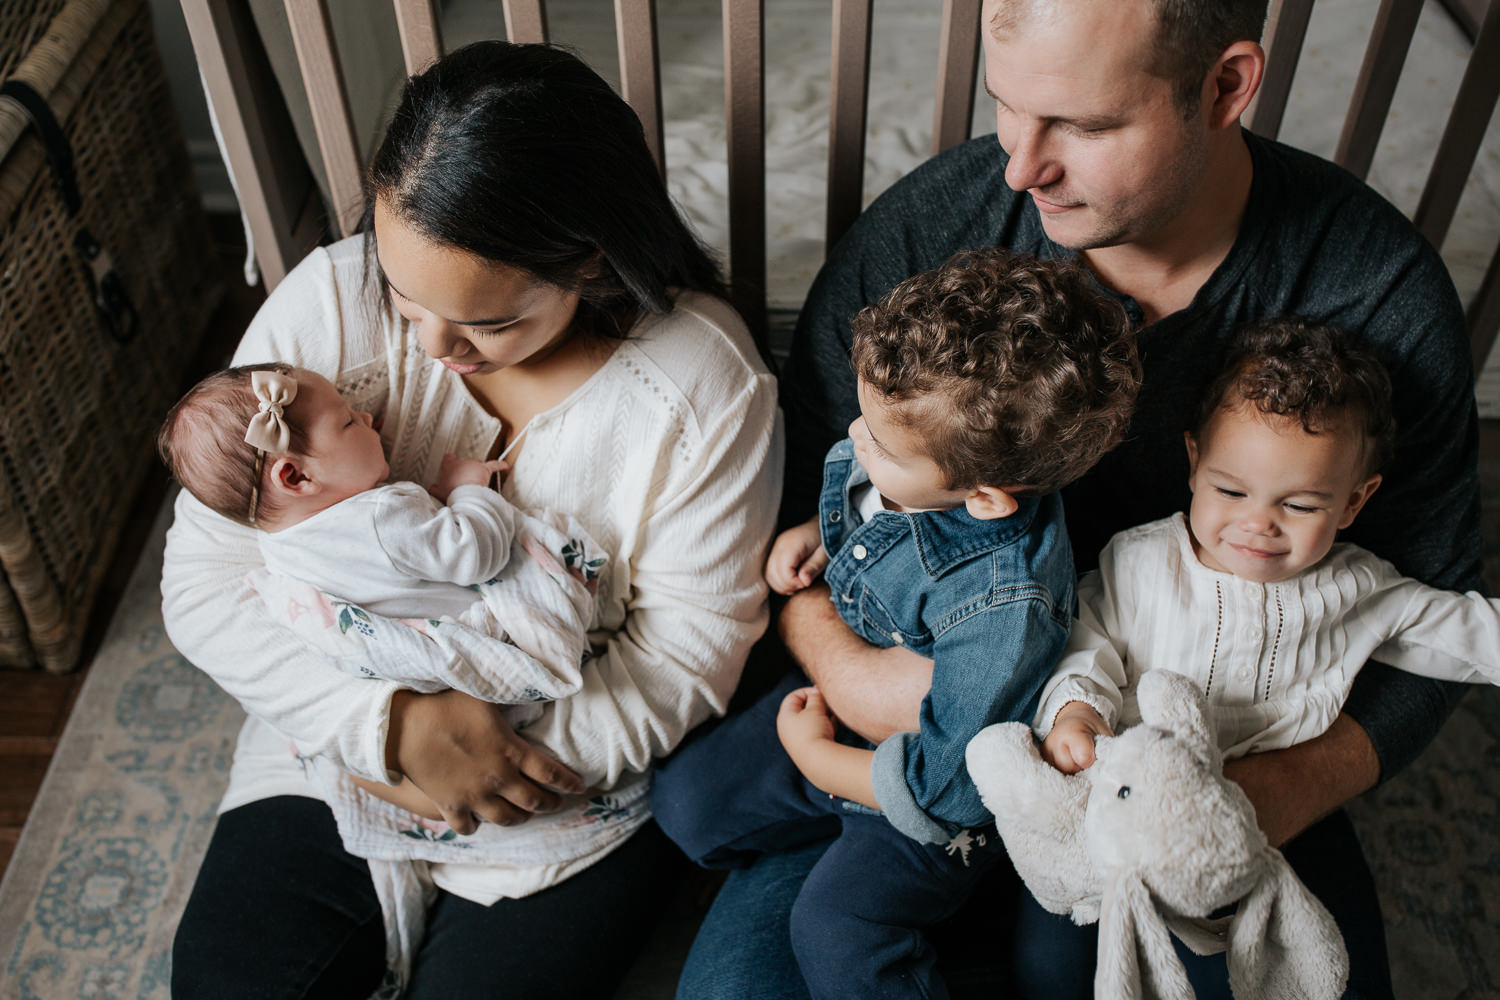 family of 5 sitting on floor of nursery leaning against crib, mom holding 2 week old baby girl, dad snuggling 2 year old boy and 1 year old daughter in his lap - York Region In-Home Photos